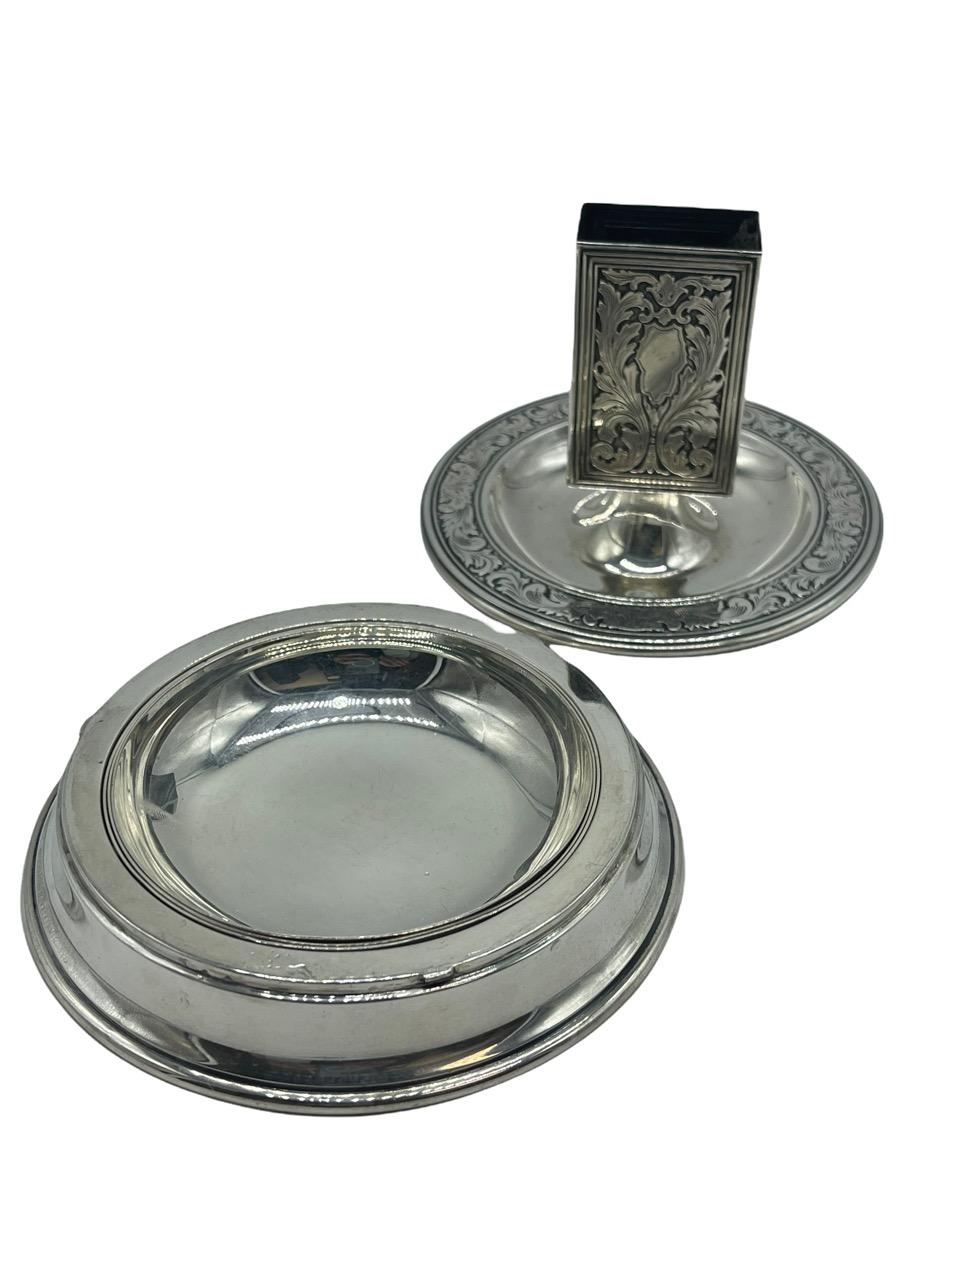 Presenting an exquisite early 19th-century treasure: a Sterling Silver Match Box Holder thoughtfully integrated into an Ashtray Stand by the renowned Tiffany and Co. This remarkable piece of functional art boasts a unique design feature – it can be